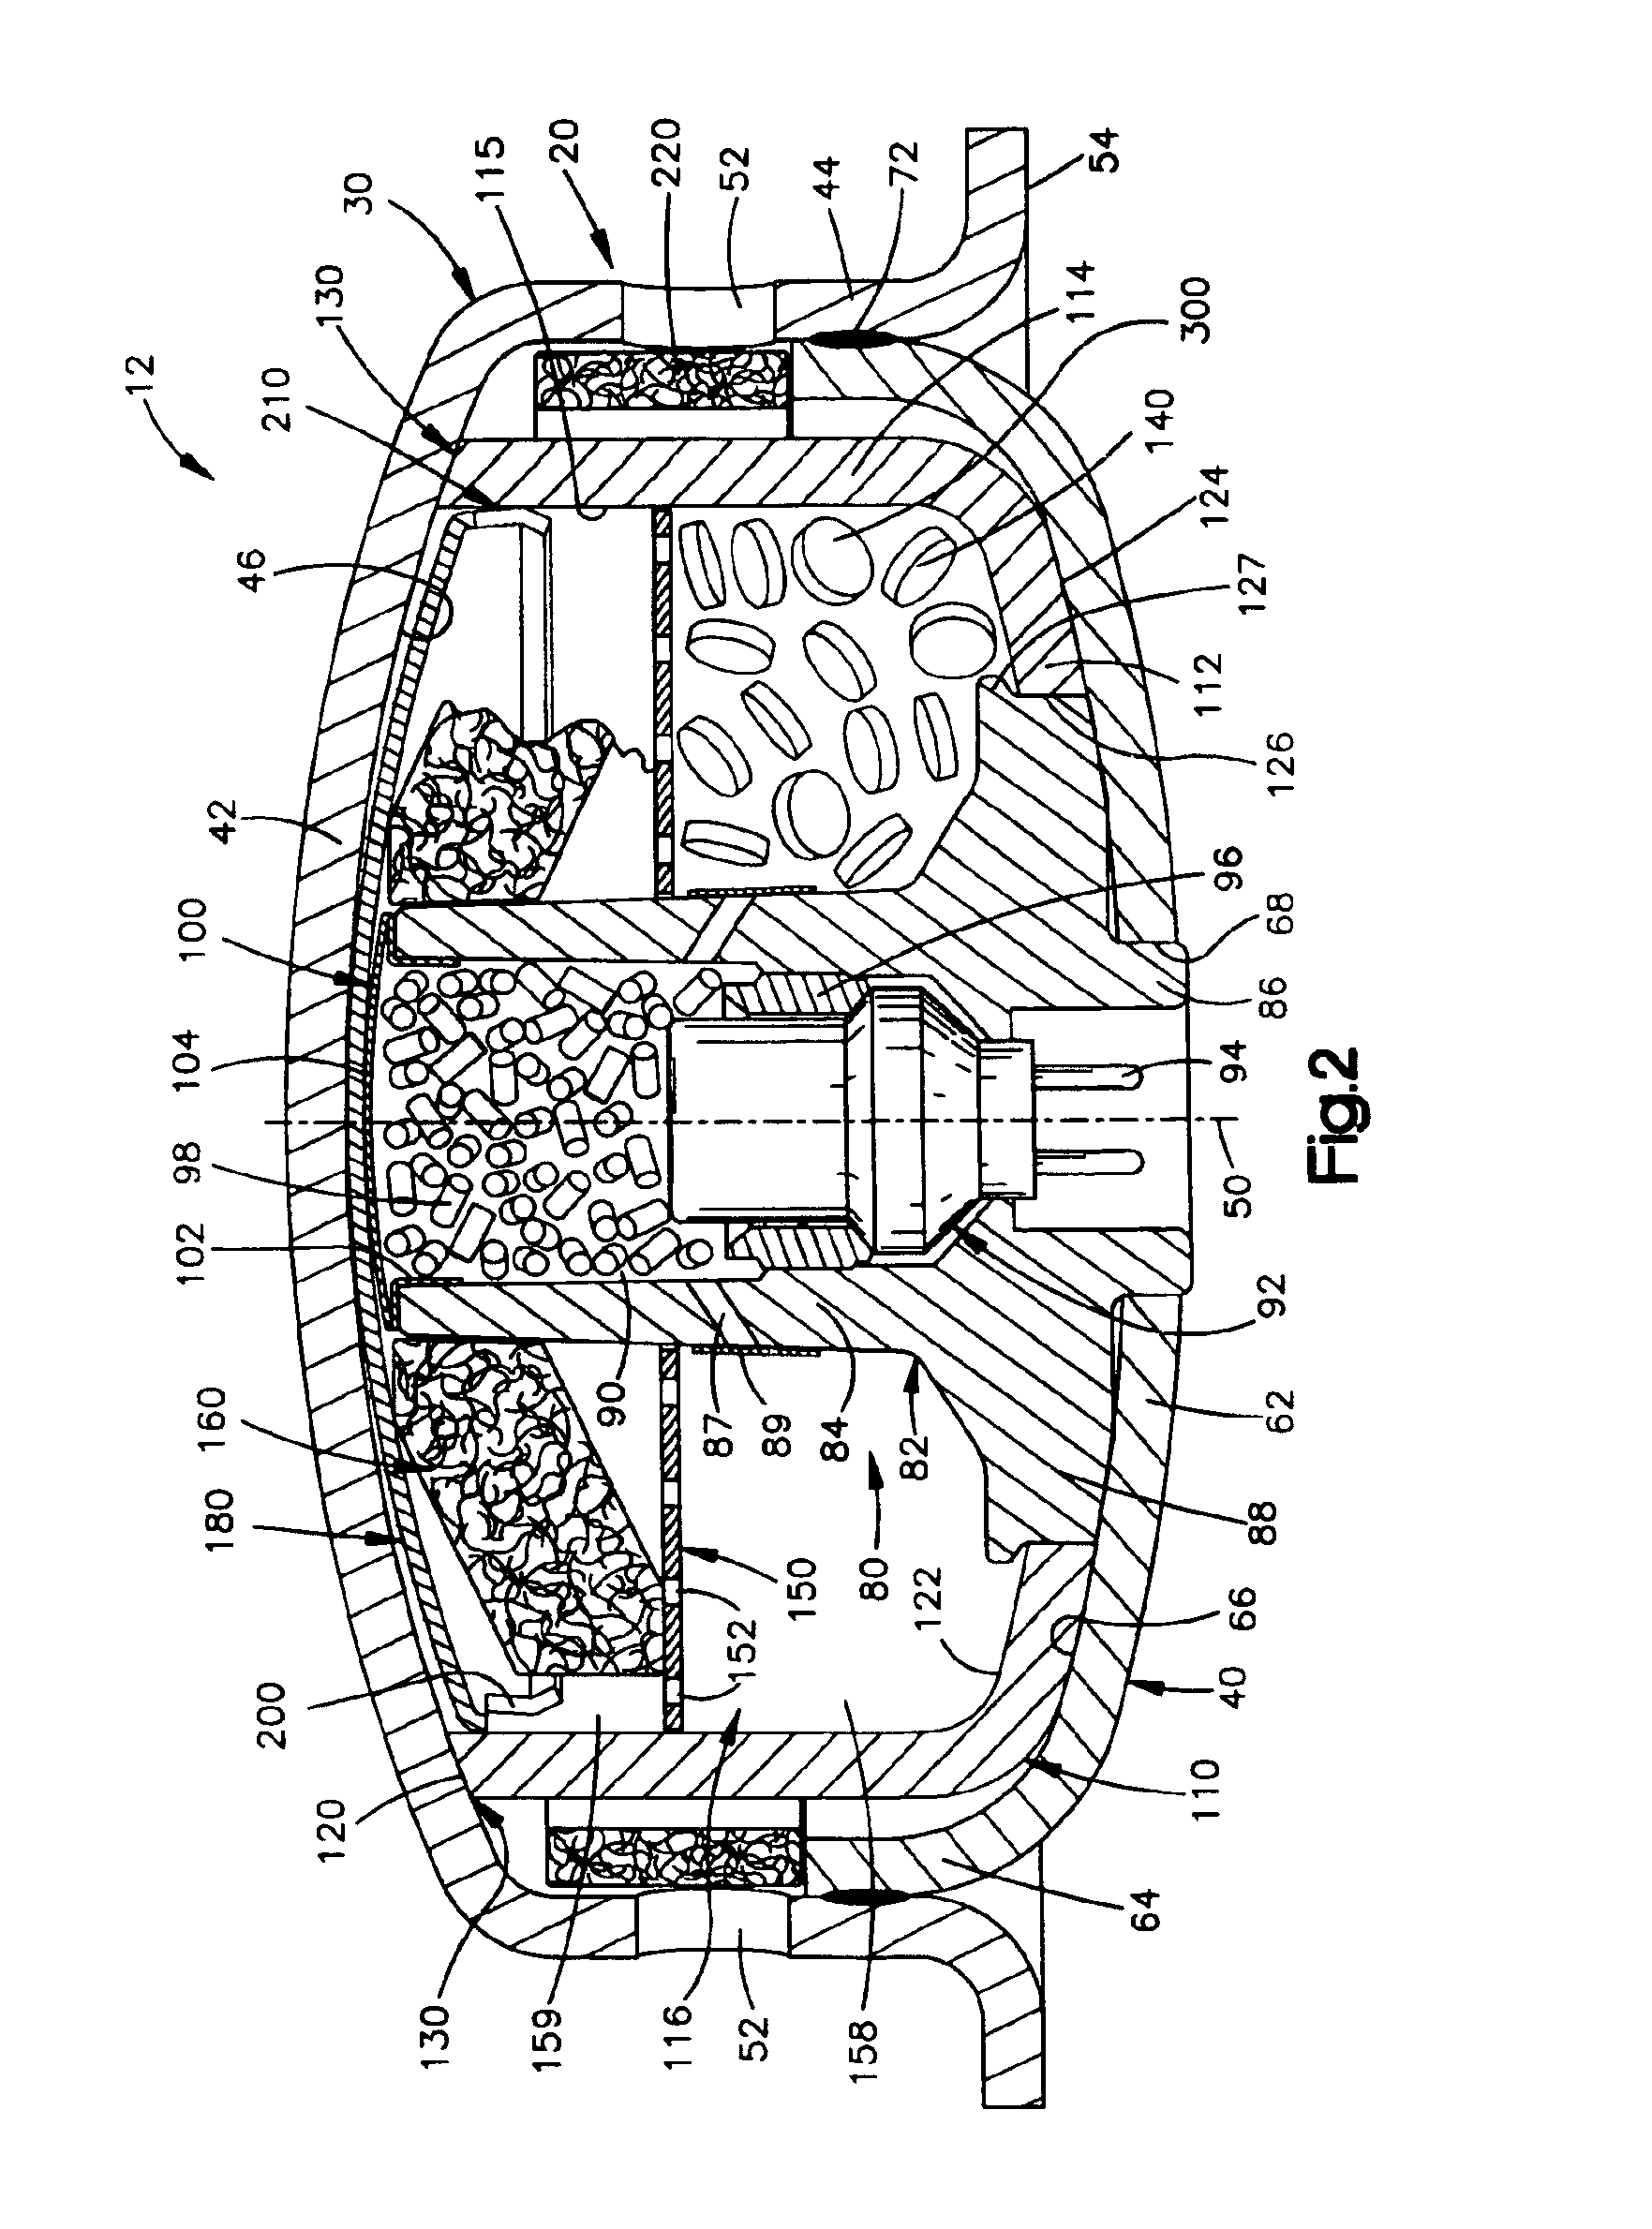 Cool burning gas generating material for a vehicle occupant protection apparatus